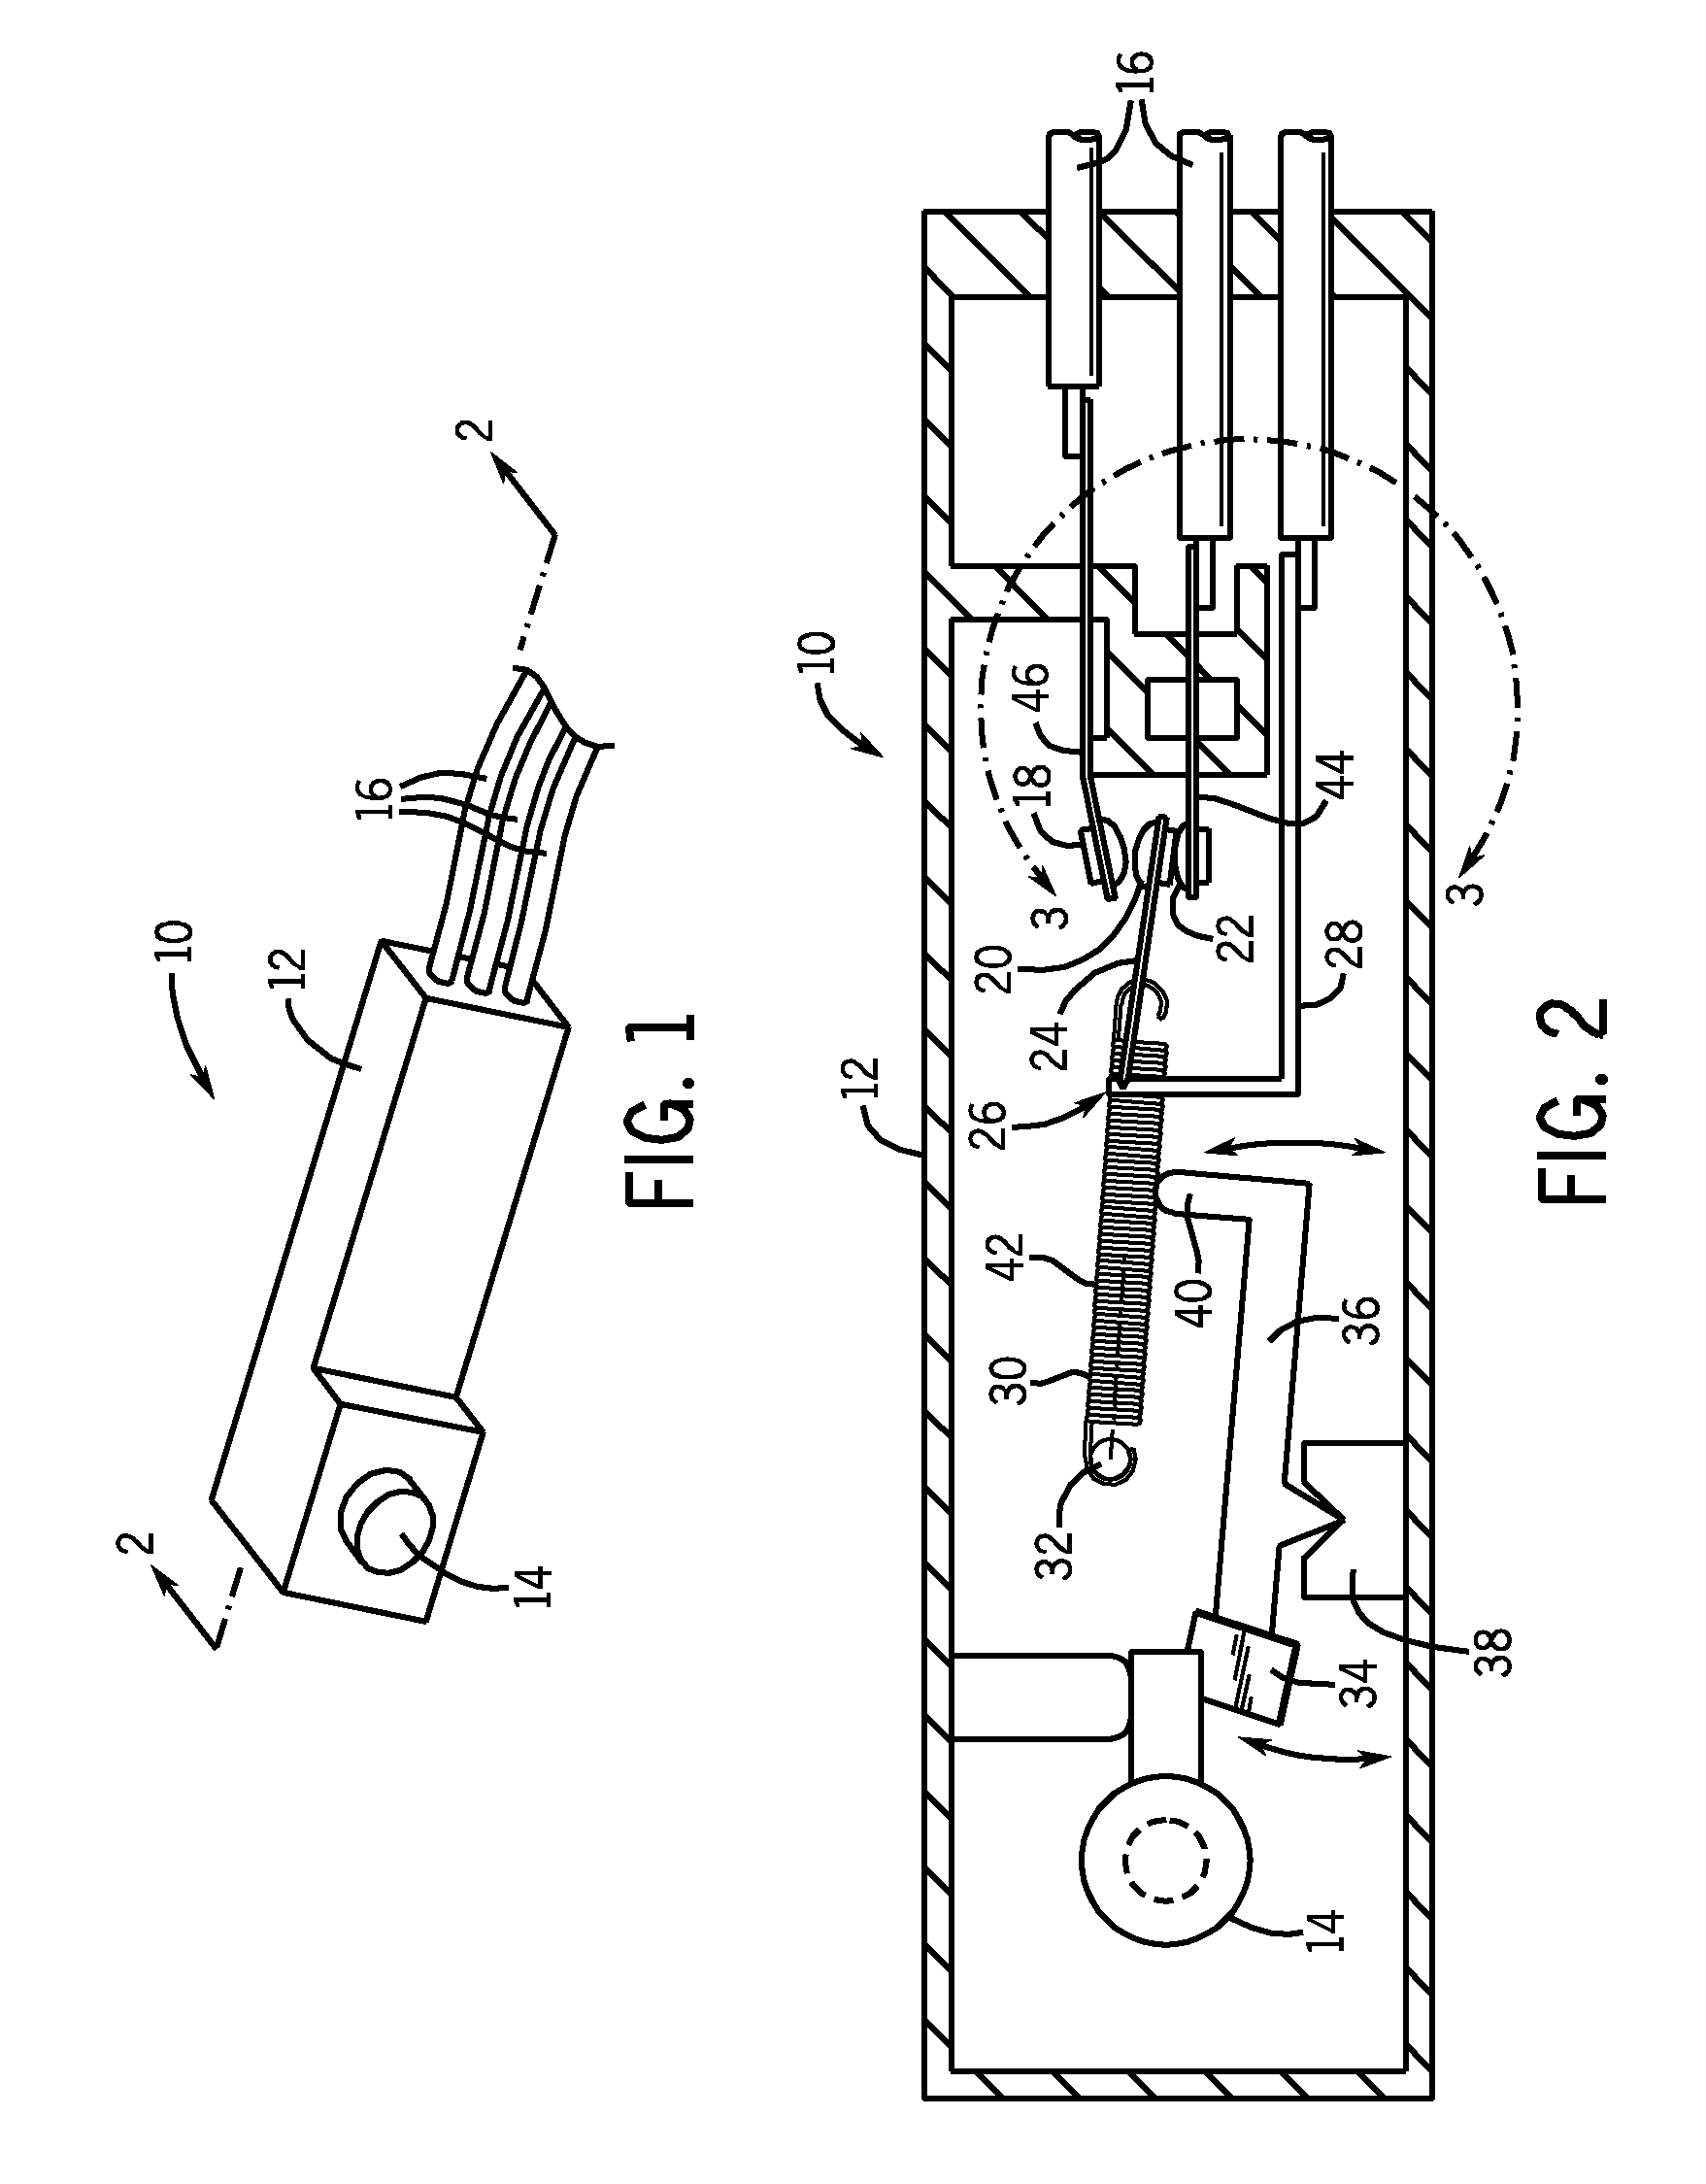 Electrical switch with shear force contact weld release